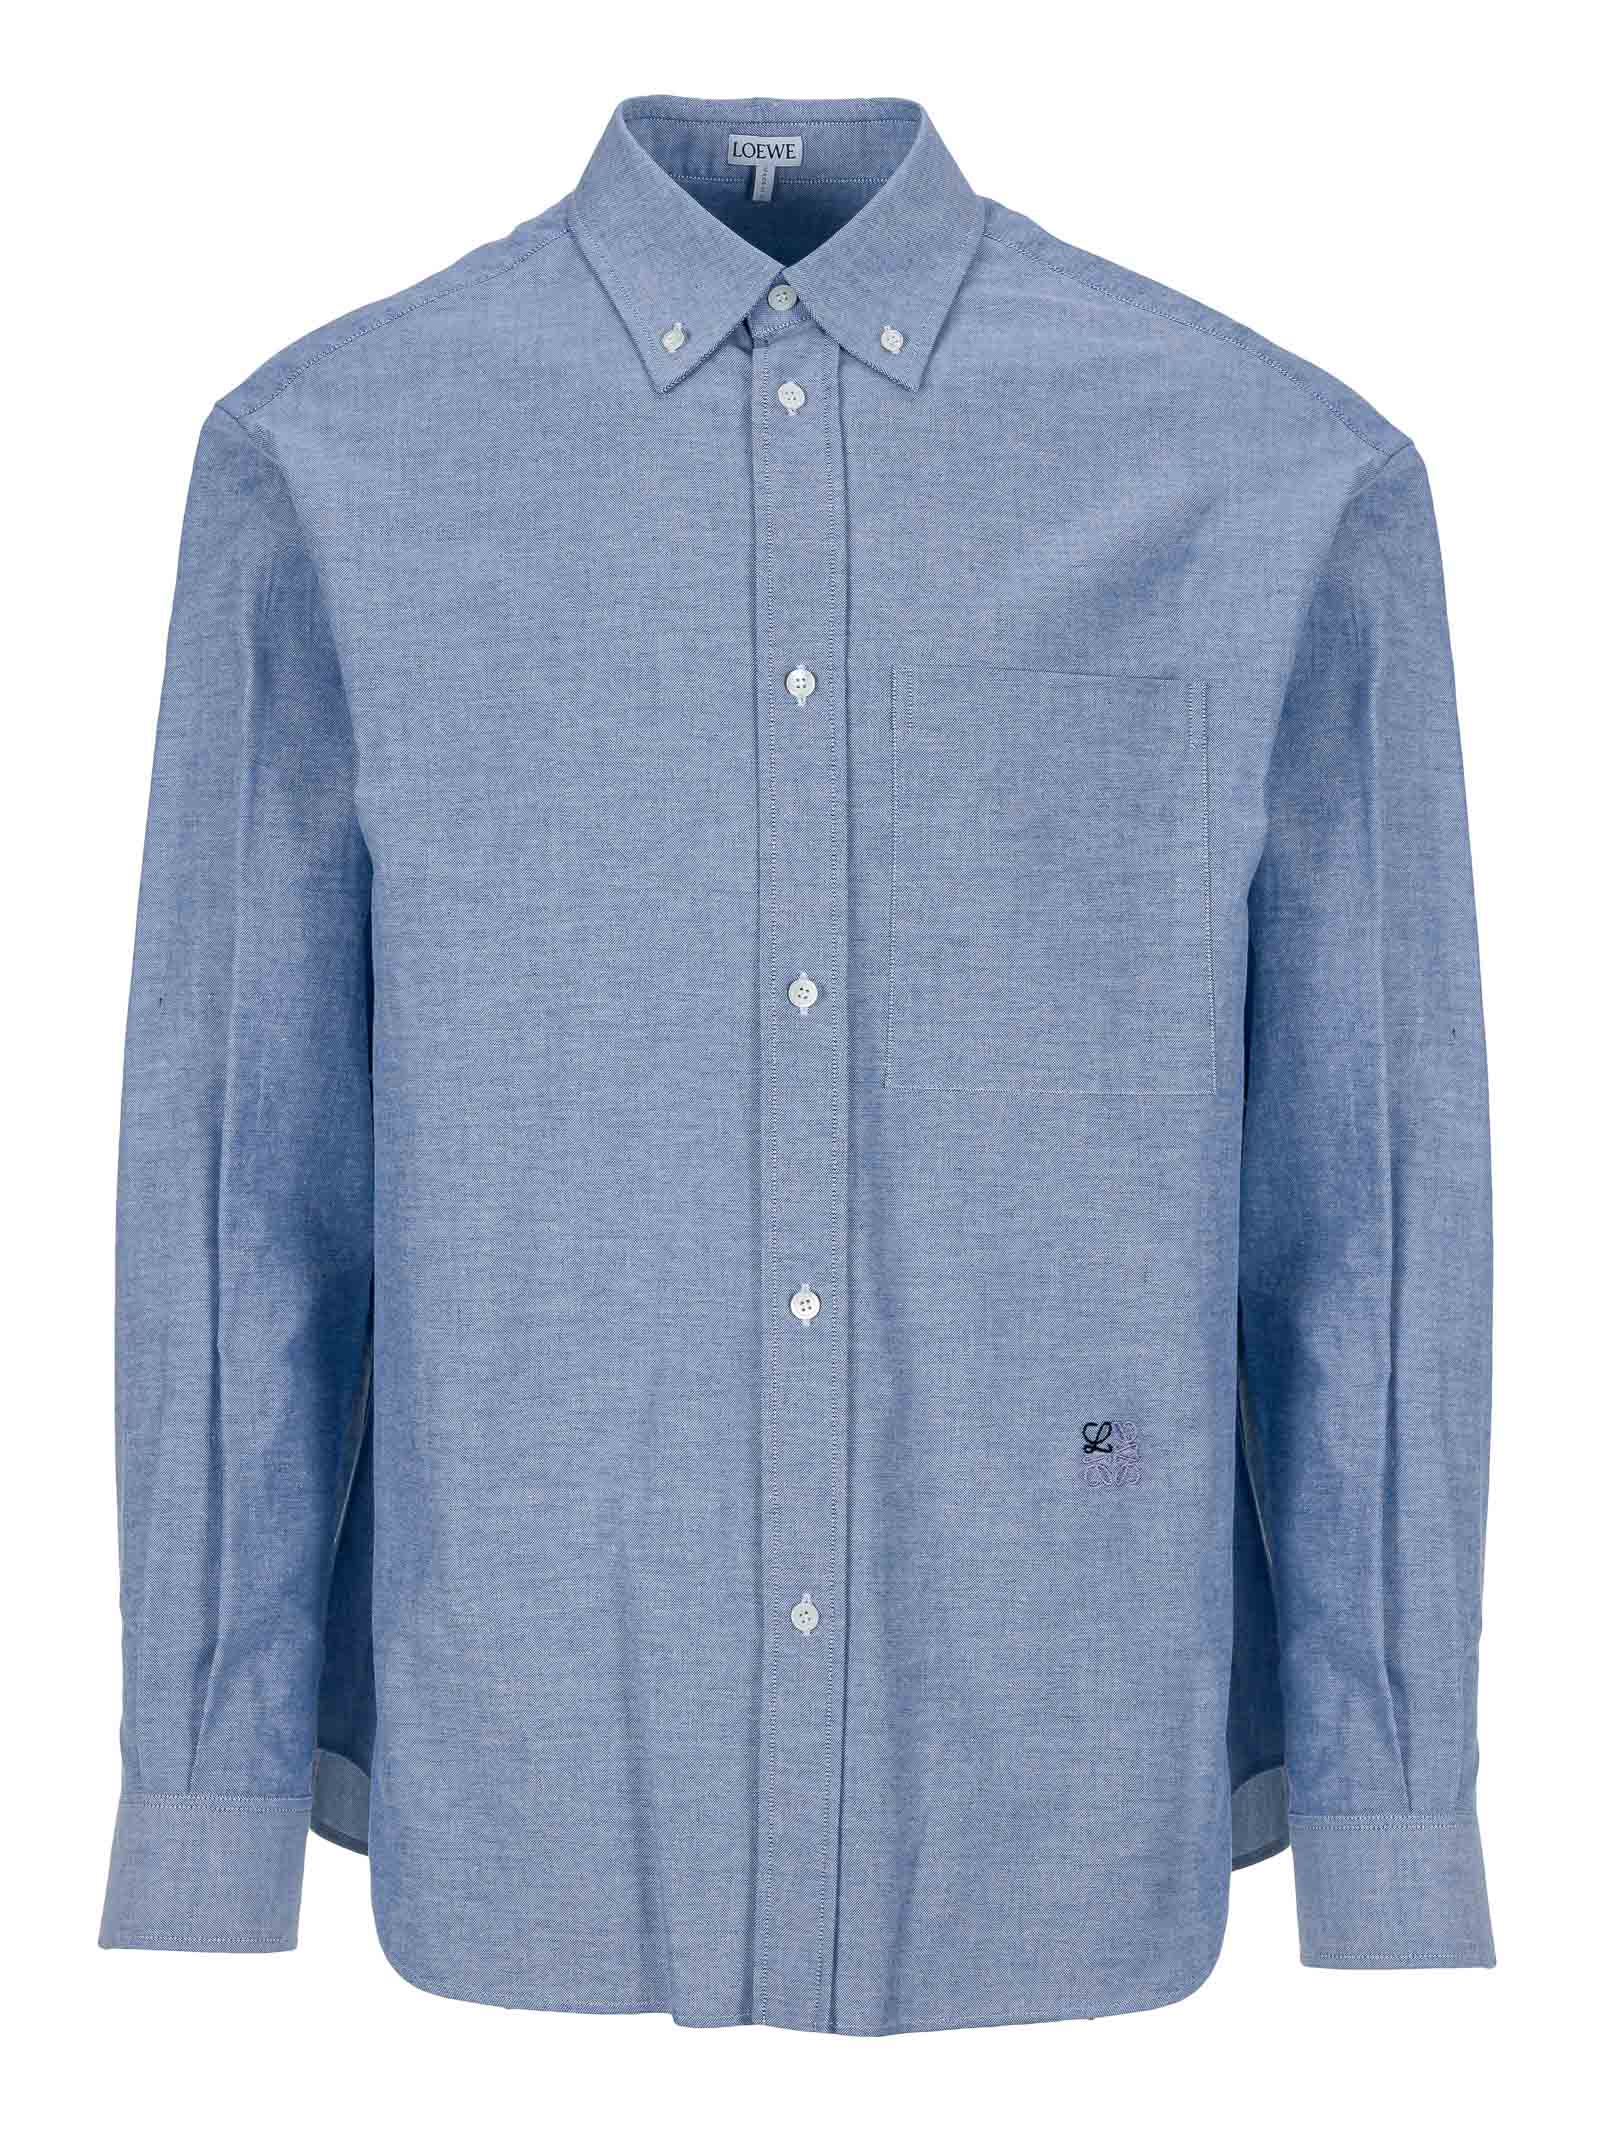 LOEWE BUTTON DOWN SHIRT IN COTTON,H526Y05W16F5140